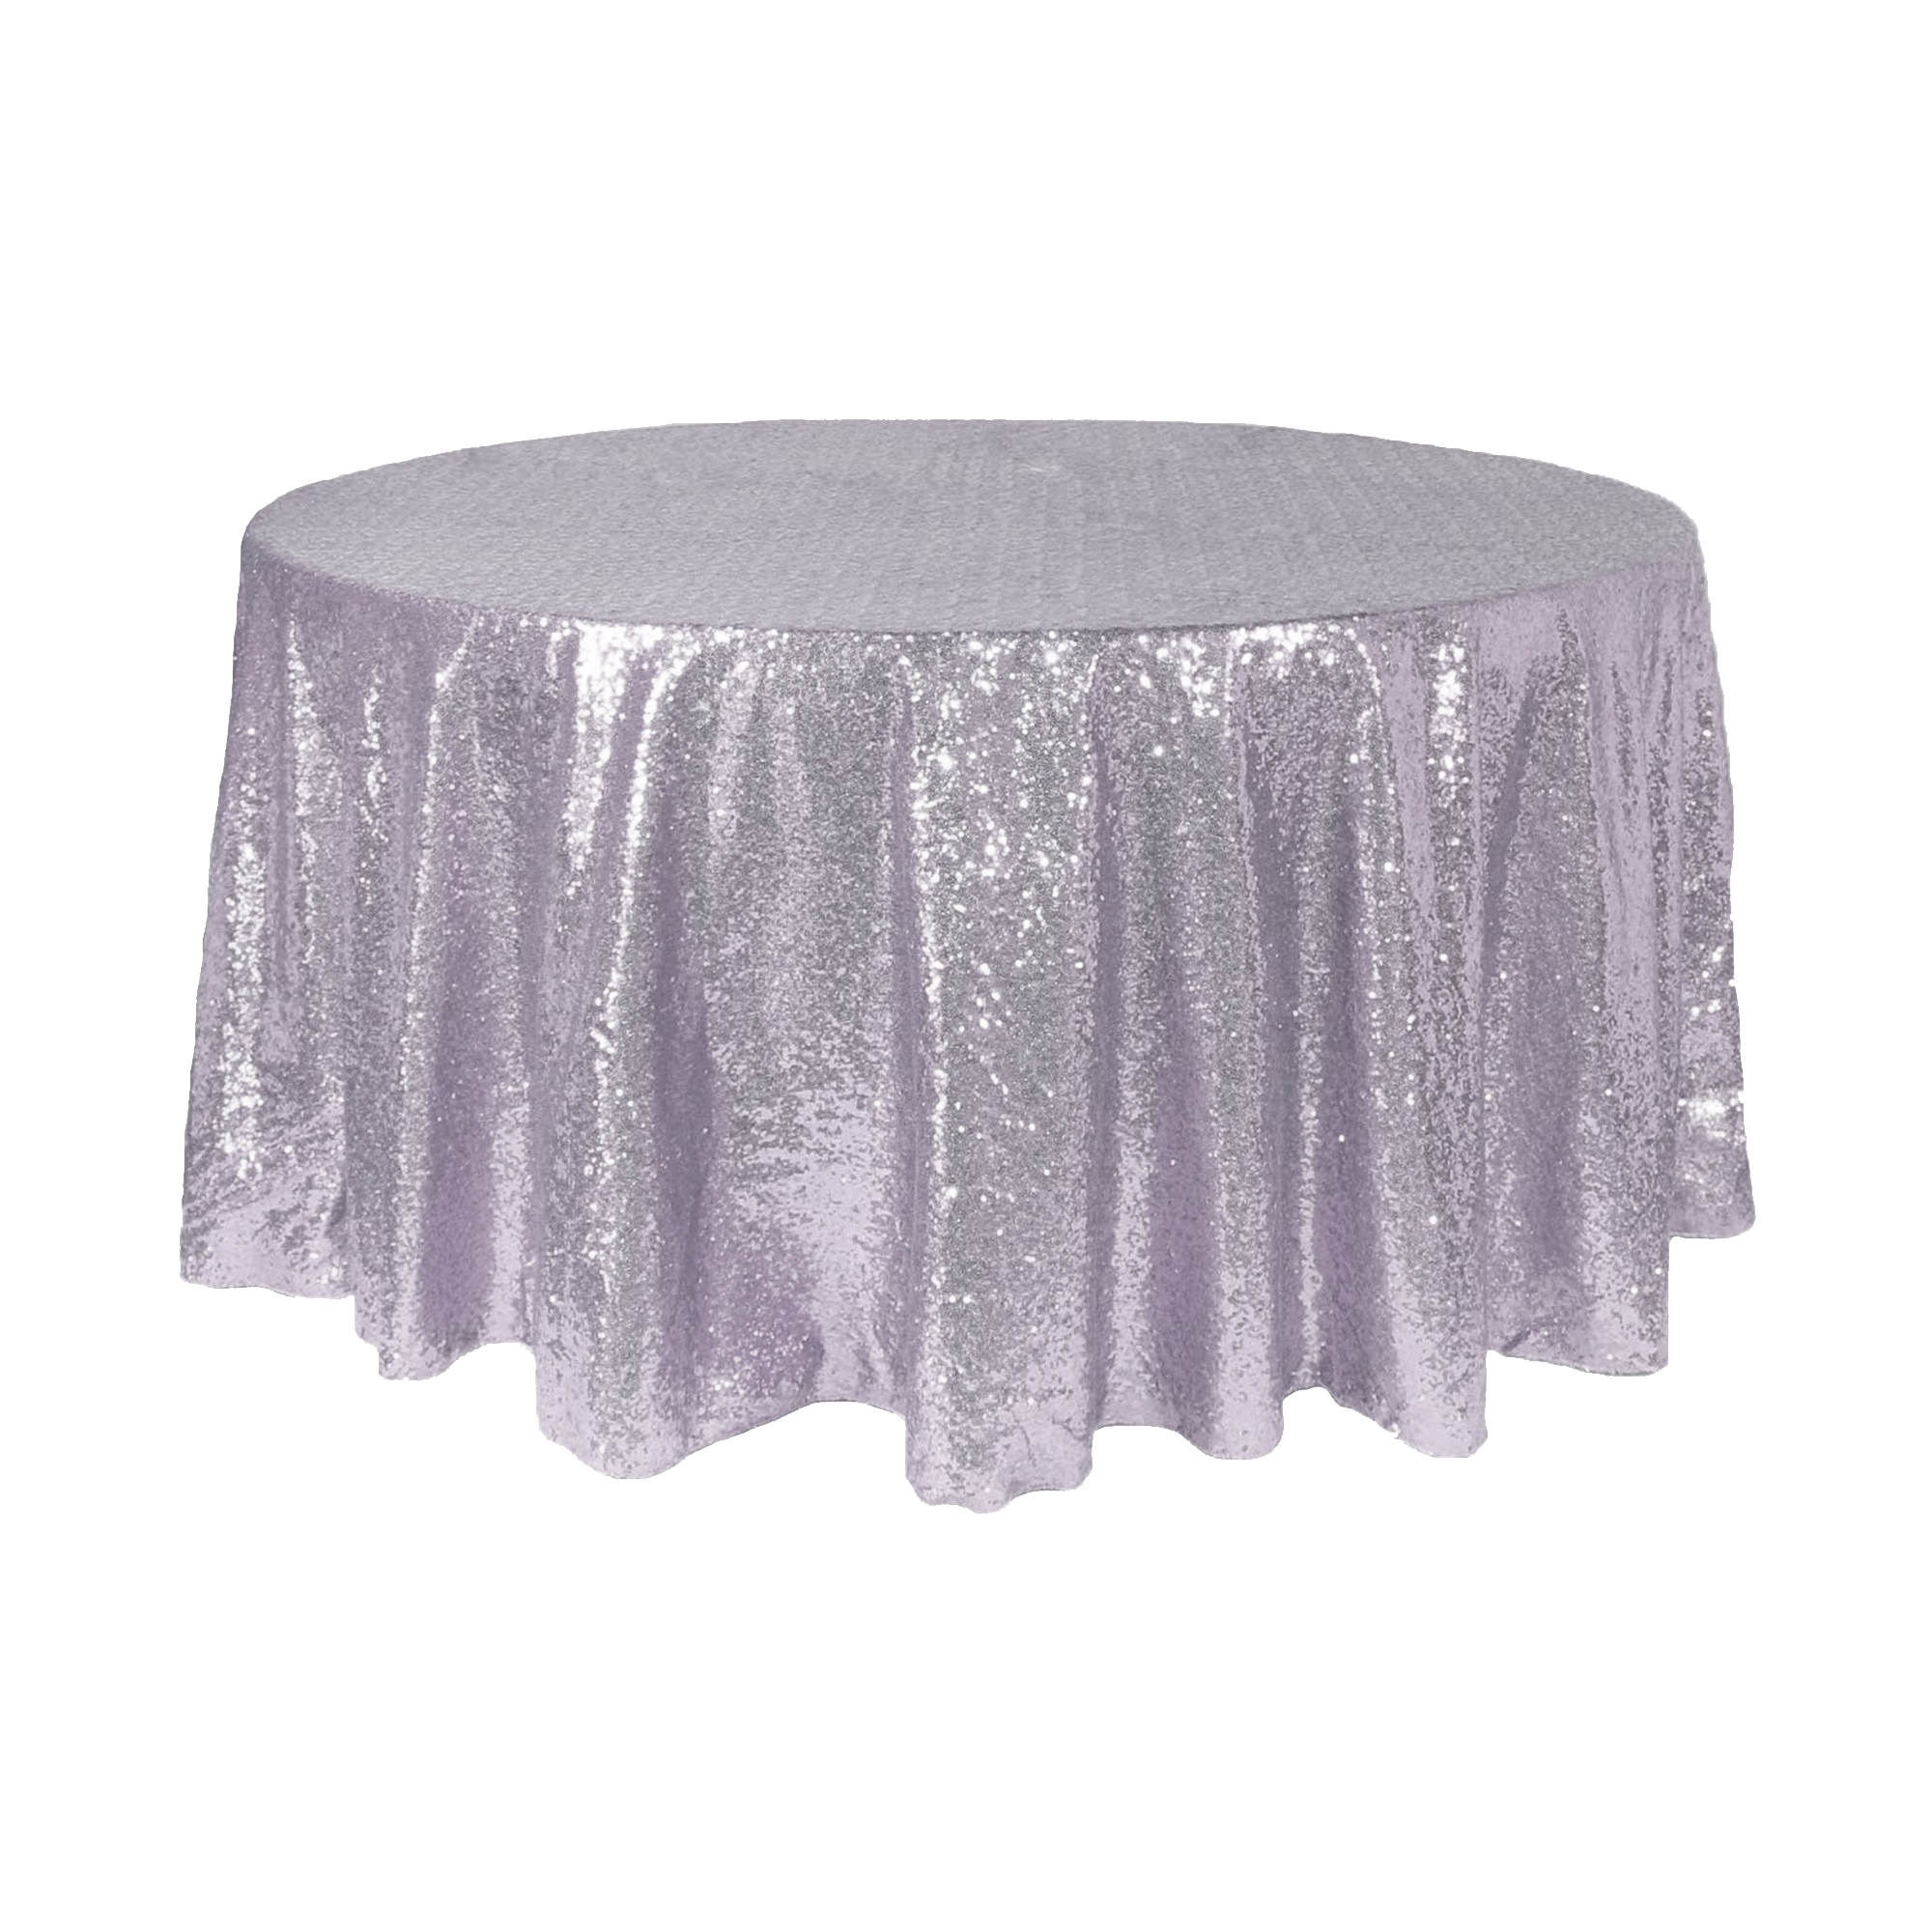 Round Sequin Table Cover 108" - White Iridescent